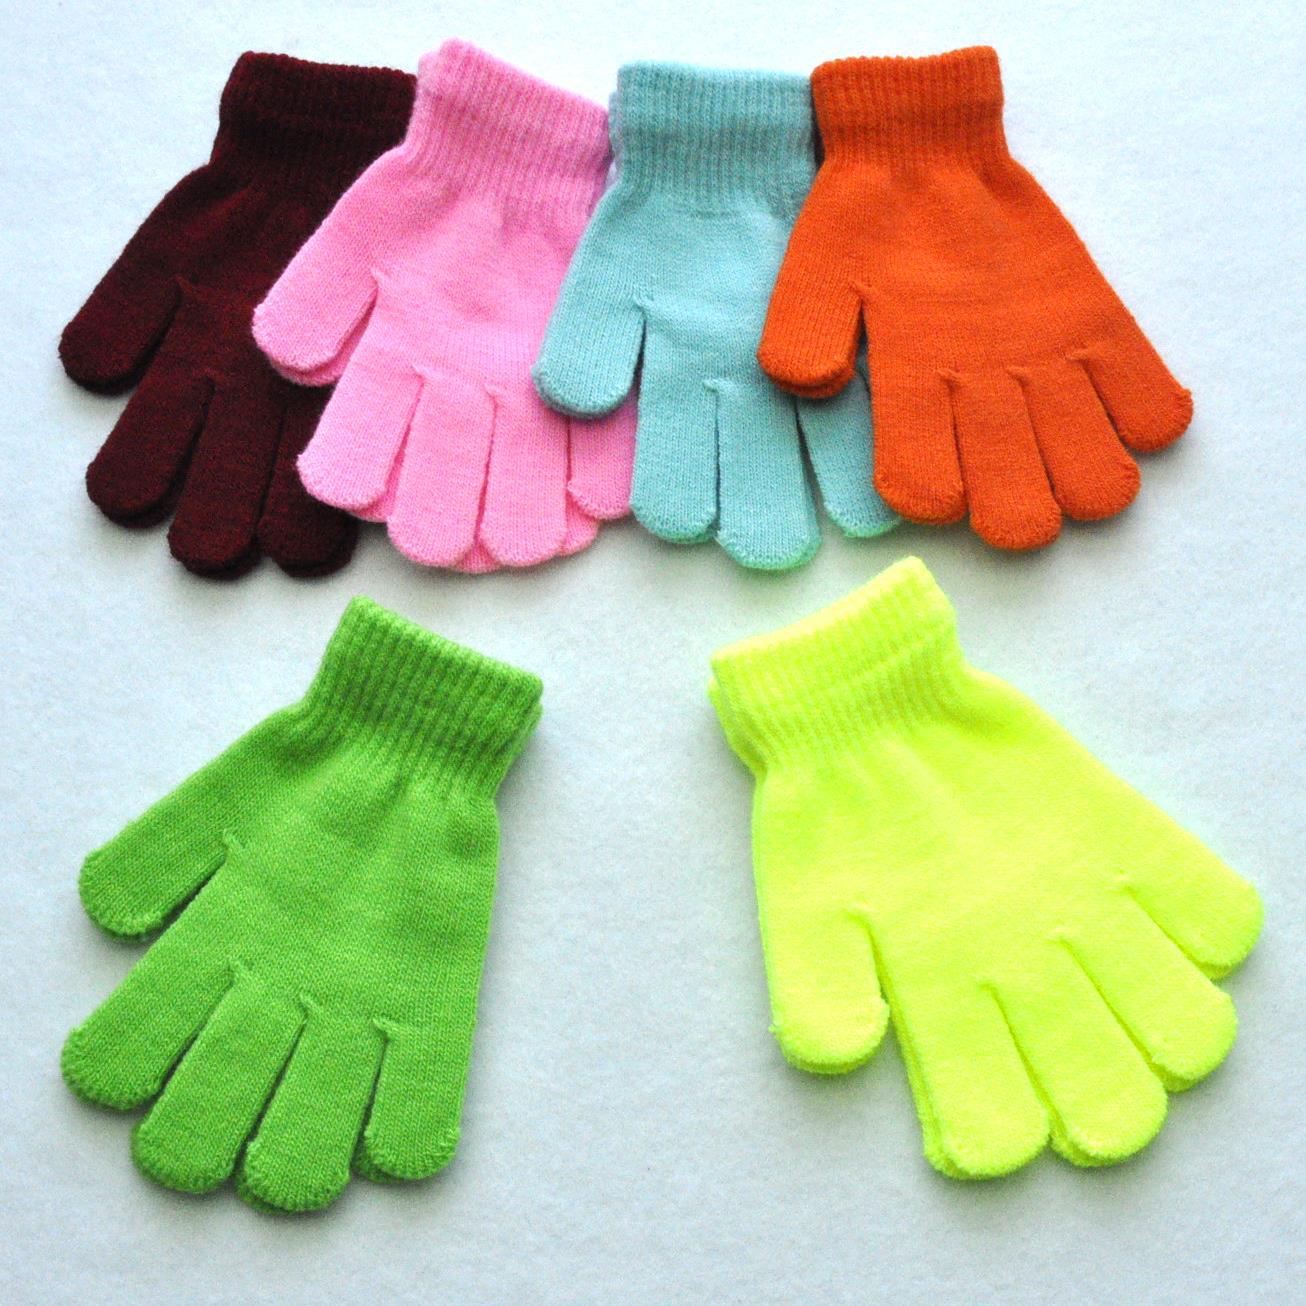 In Stock 6-11 Years Old Primary School Students Winter Writing Cold-Proof Warm Gloves Monochrome Acrylic Children's Gloves with Logo